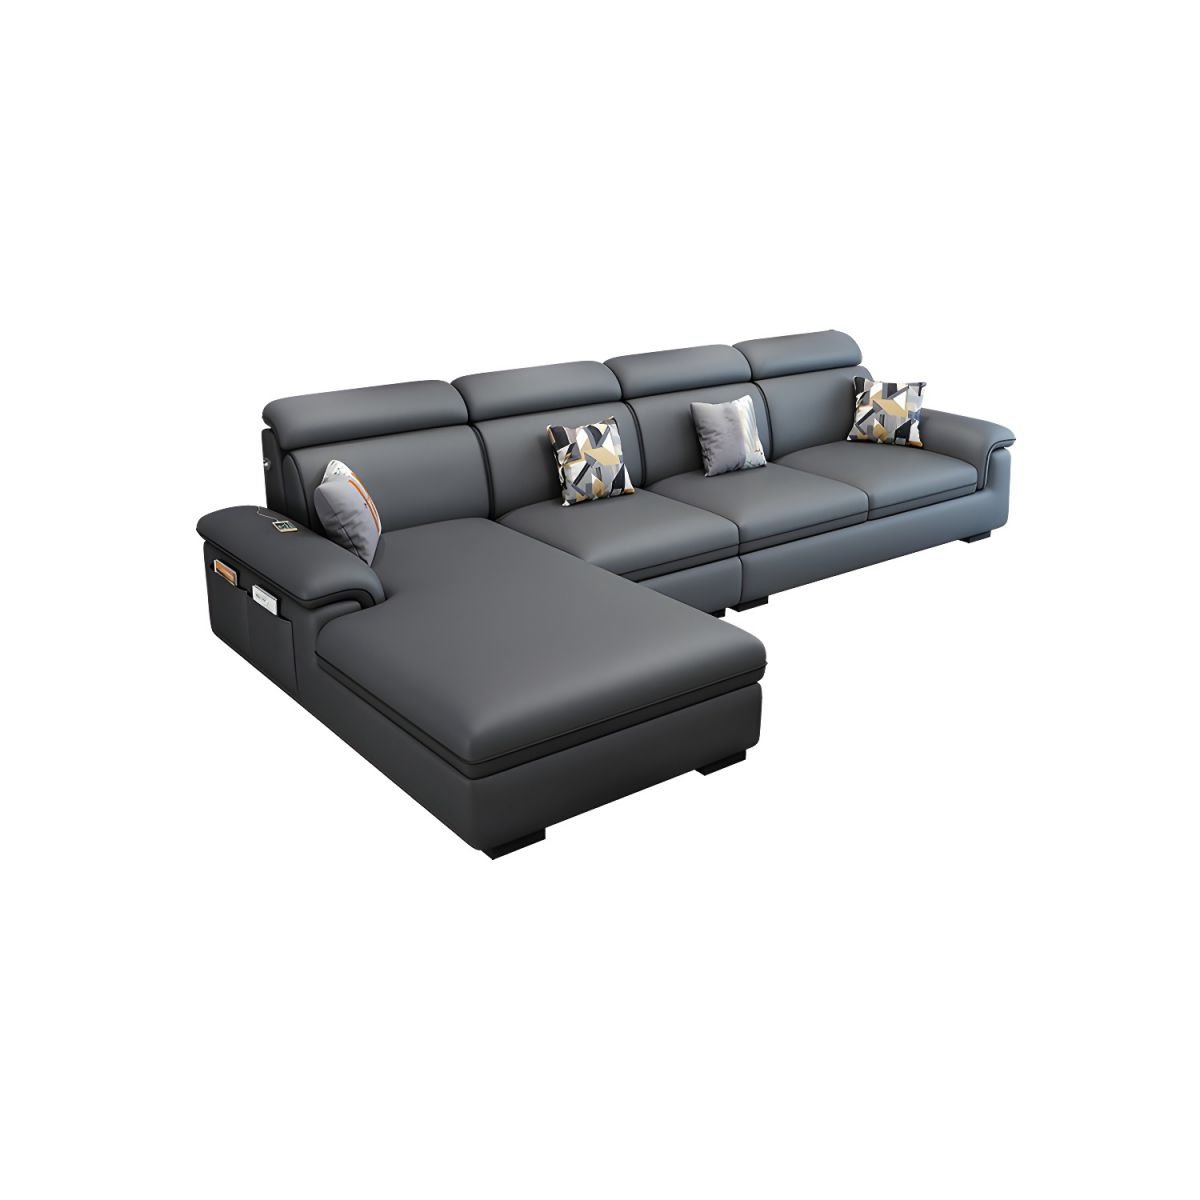 Wooden Modern 9 Feet L-Shape Sectionals No Distressing Seats 4 Storage Included Sofa Chaise - Tech Cloth Dark Gray Left